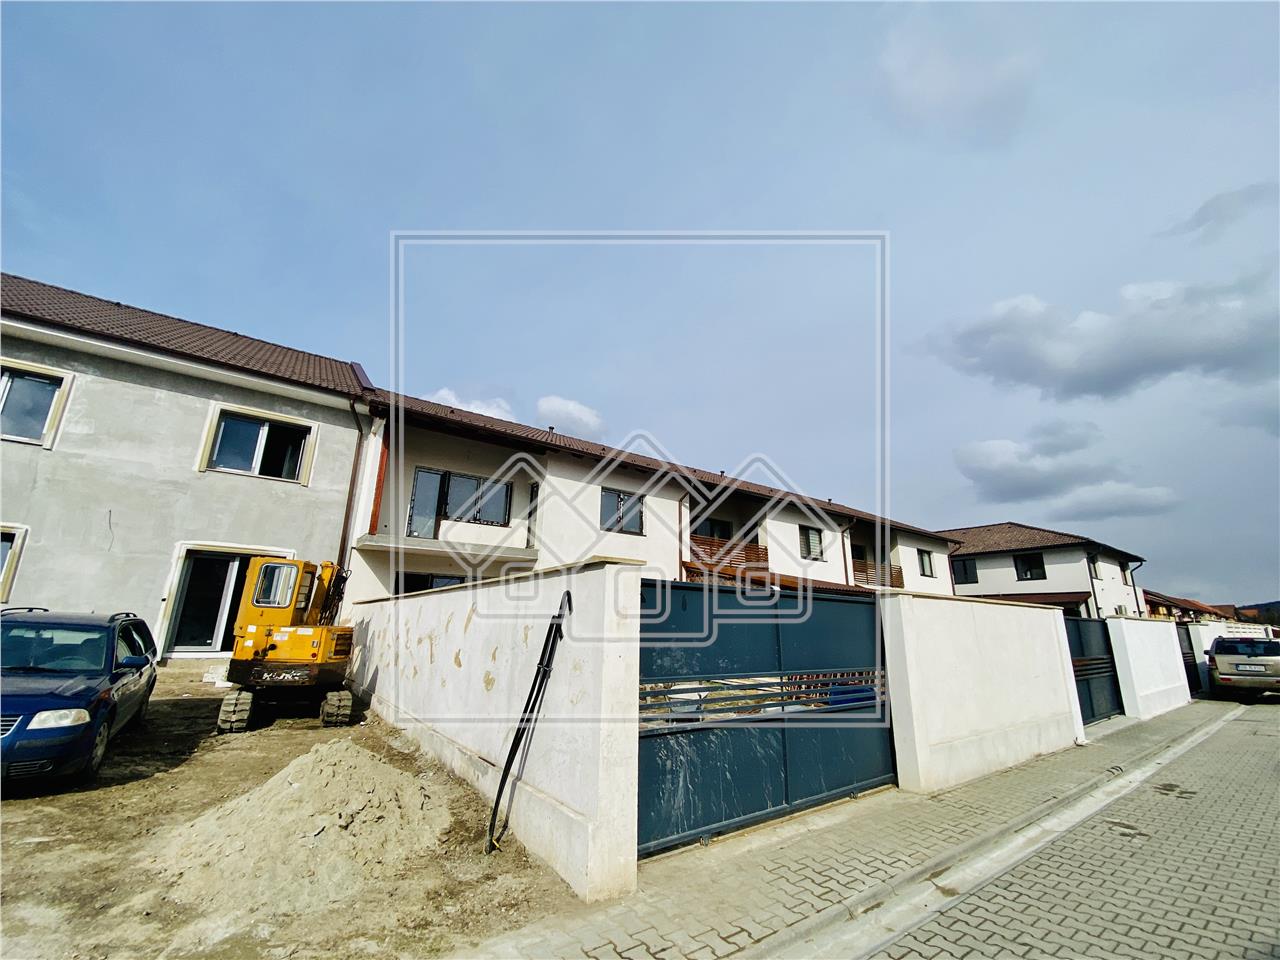 House for sale in Sibiu - triplex type - 146 usable sqm - turnkey deli